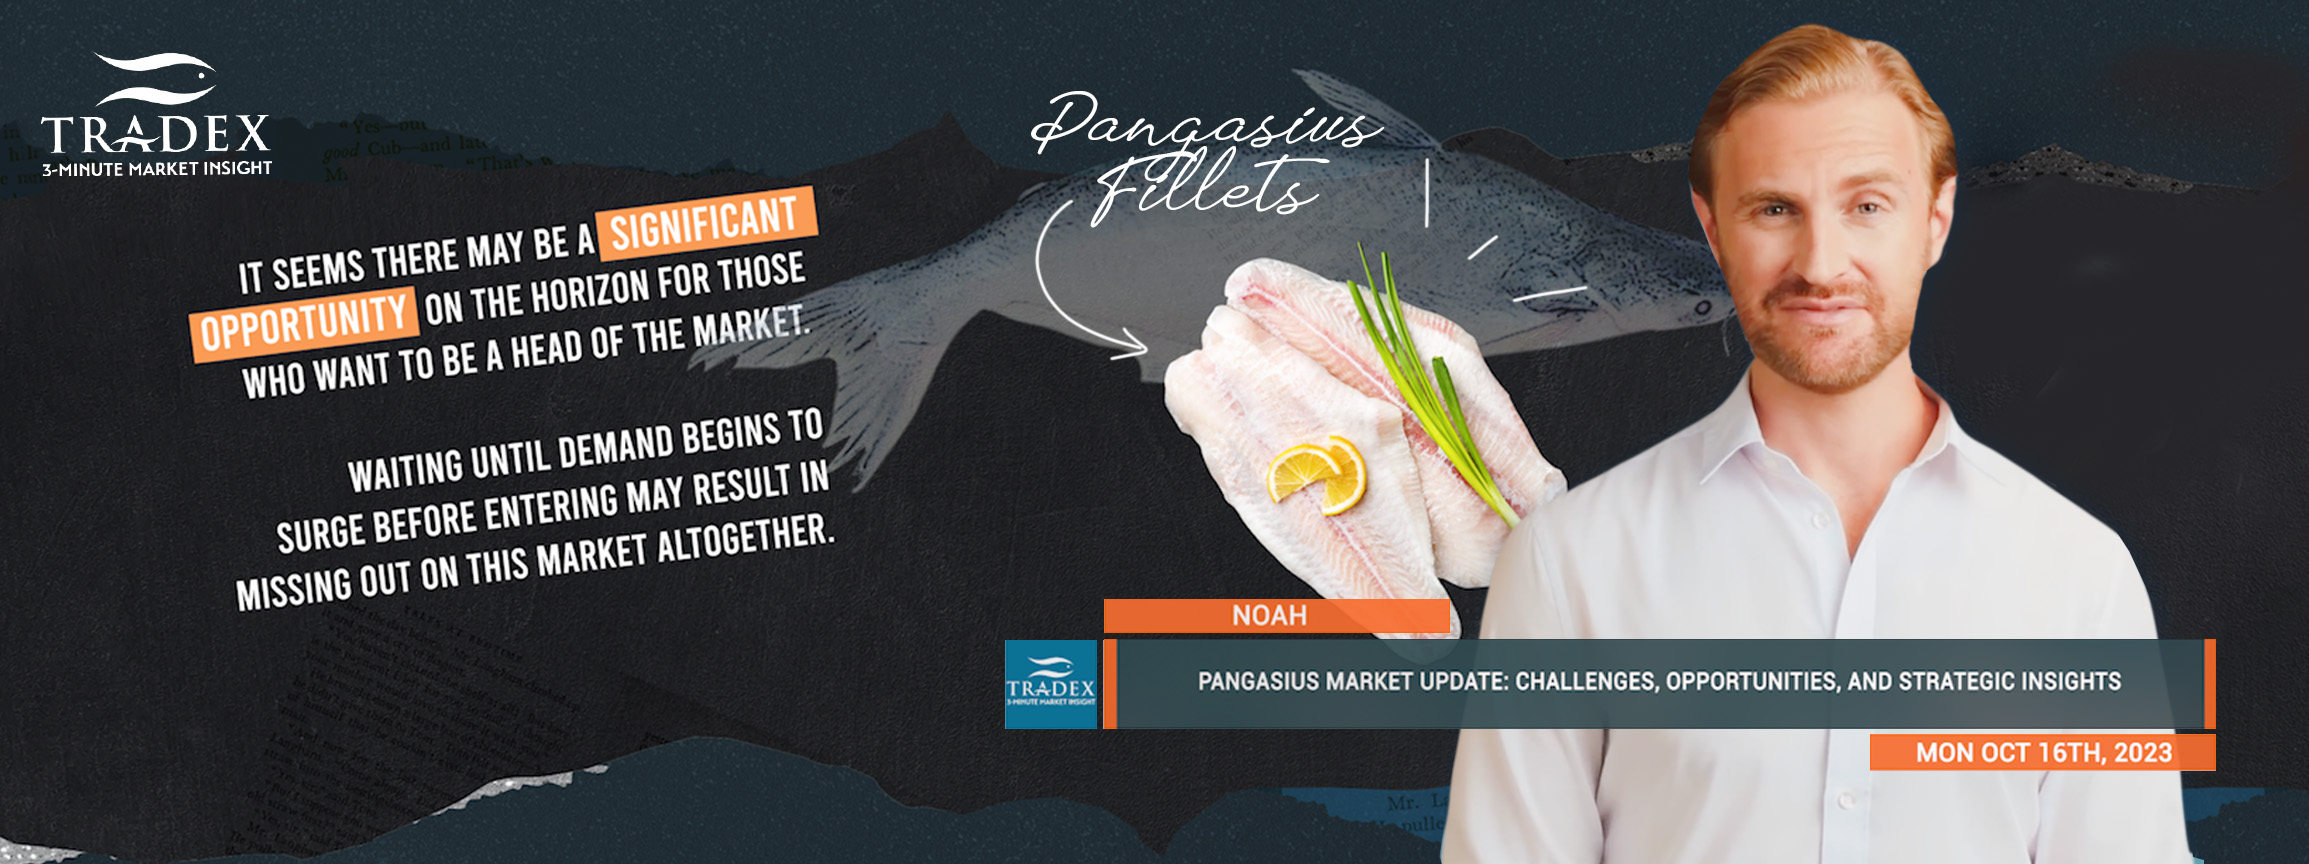 Pangasius Market Update: Challenges, Opportunities, and Strategic Insights